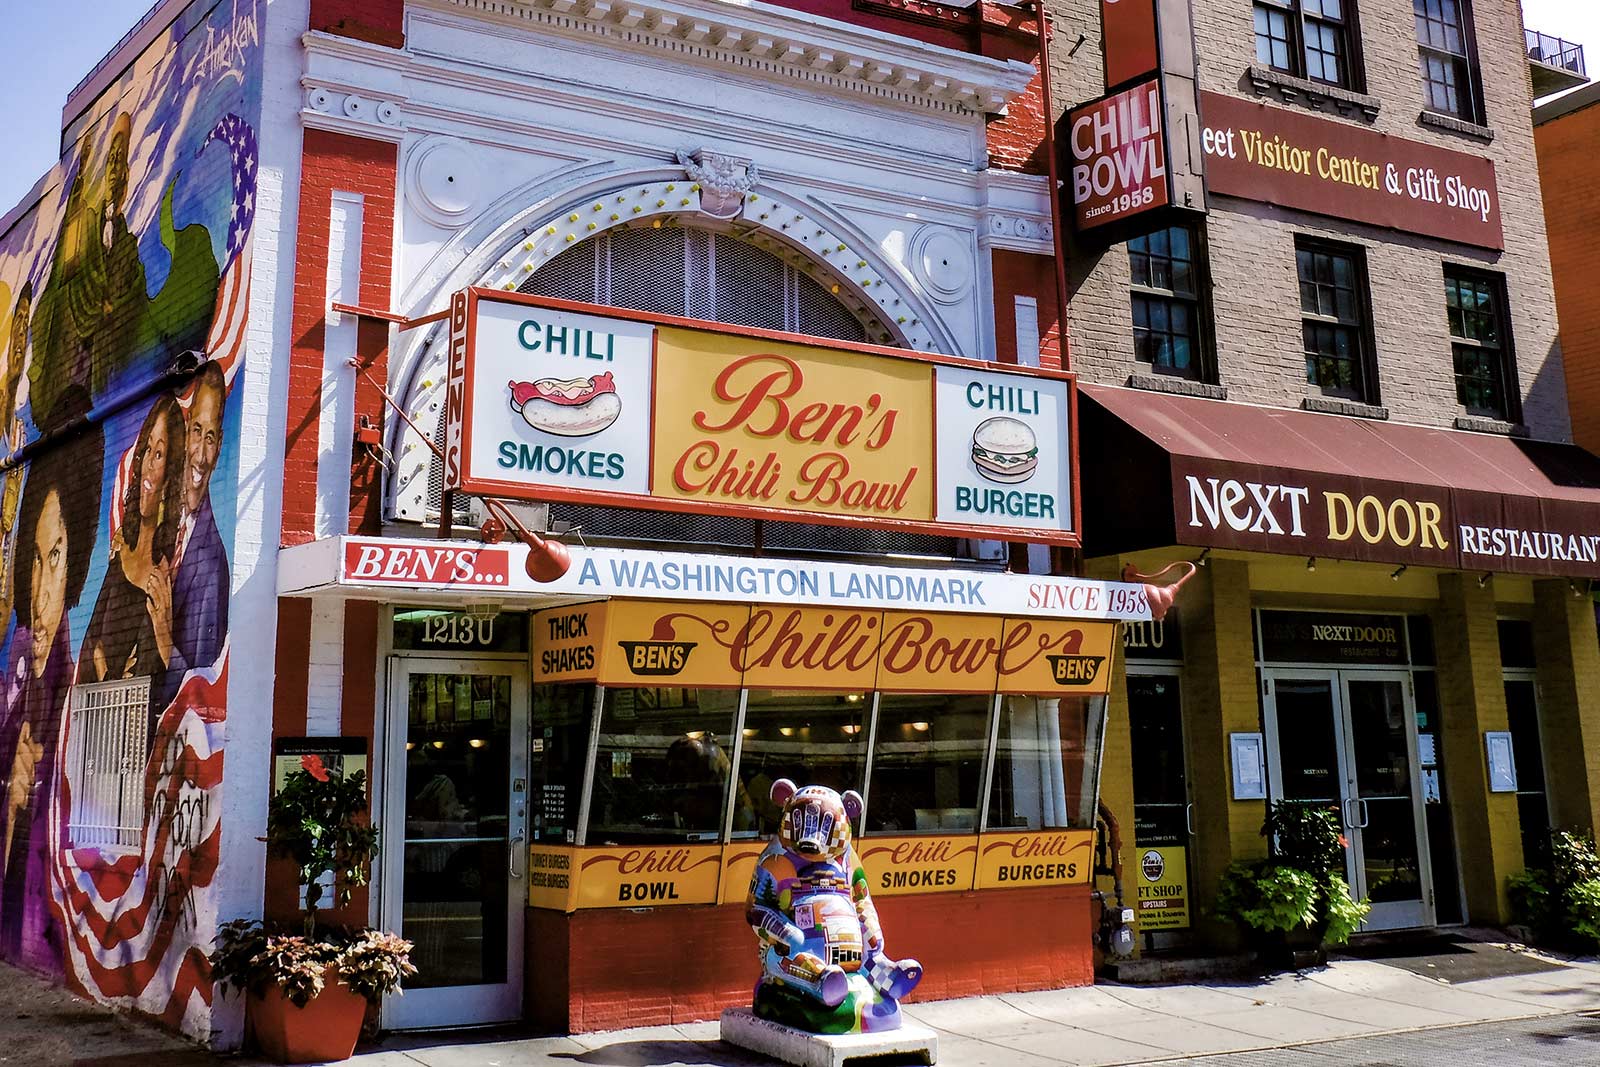 The legendary Ben's Chili Bowl open since 1958